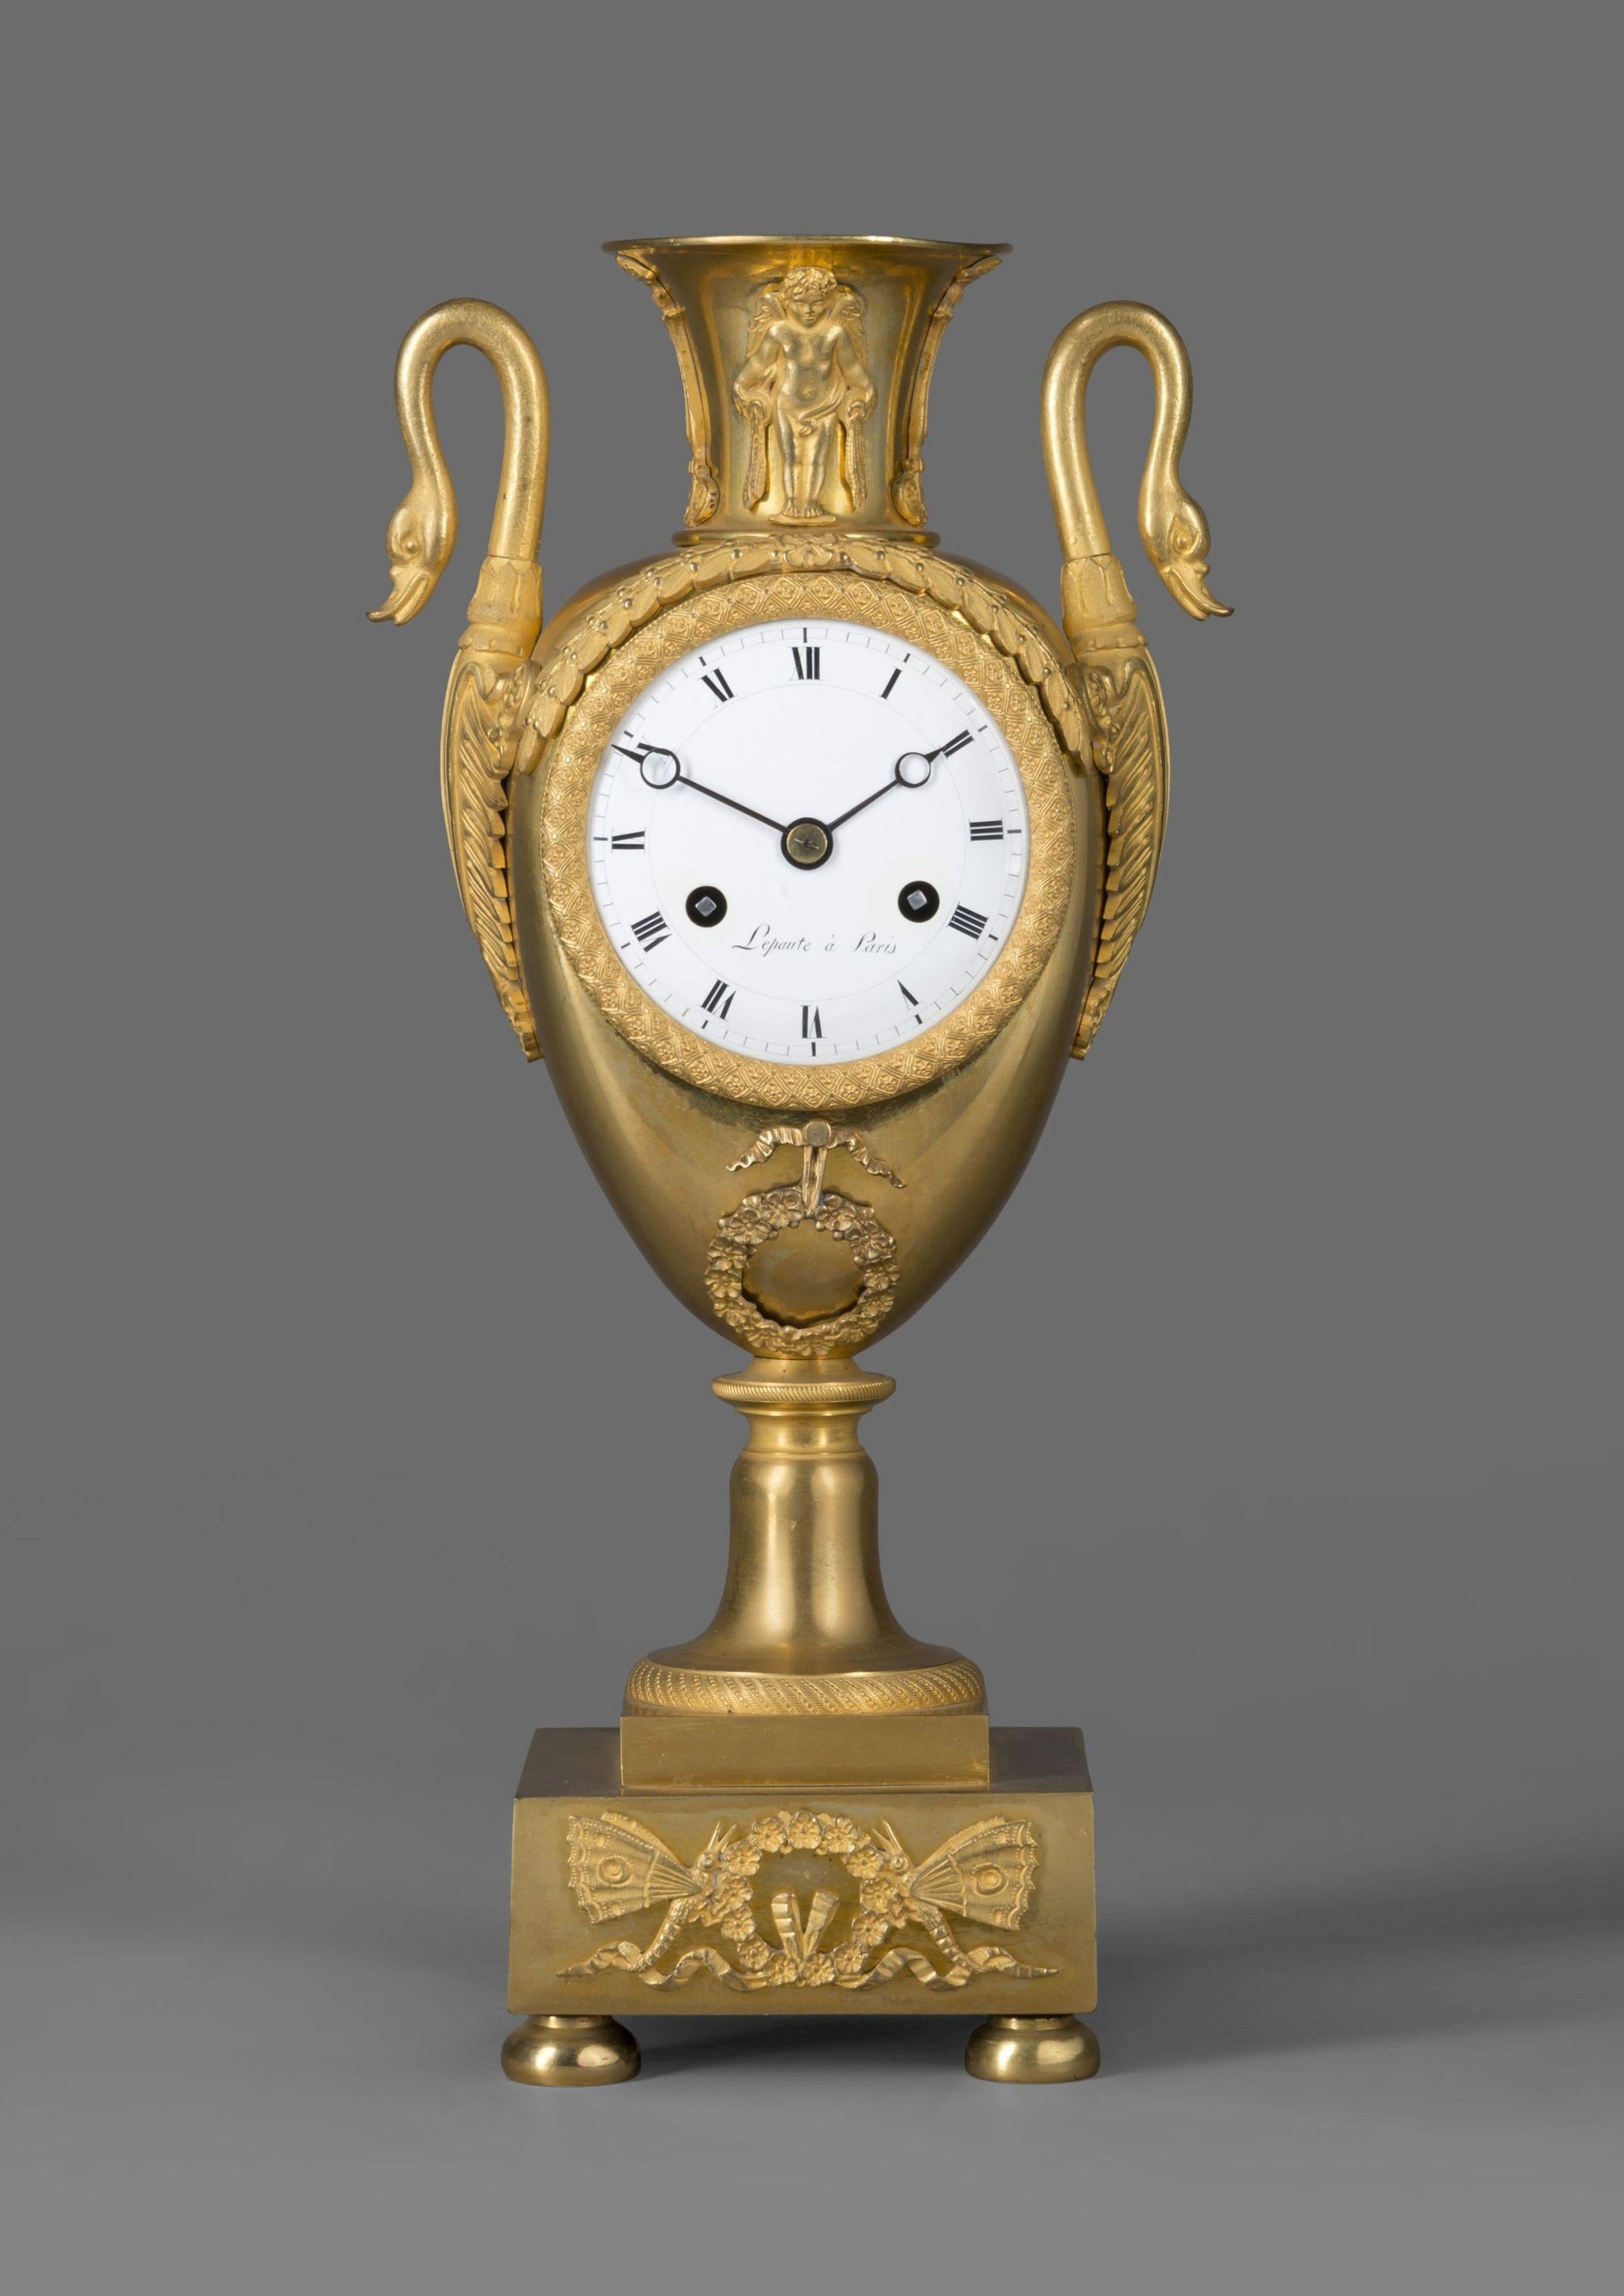 A gilt bronze Empire clock in the form of a classical urn, by Maison Lepautre.

French, circa 1825.

The dial signed 'Lepaute a Paris'.

The clock has an ornate cast bezel with a 3-inch porcelain dial with Roman numerals and Breguet style